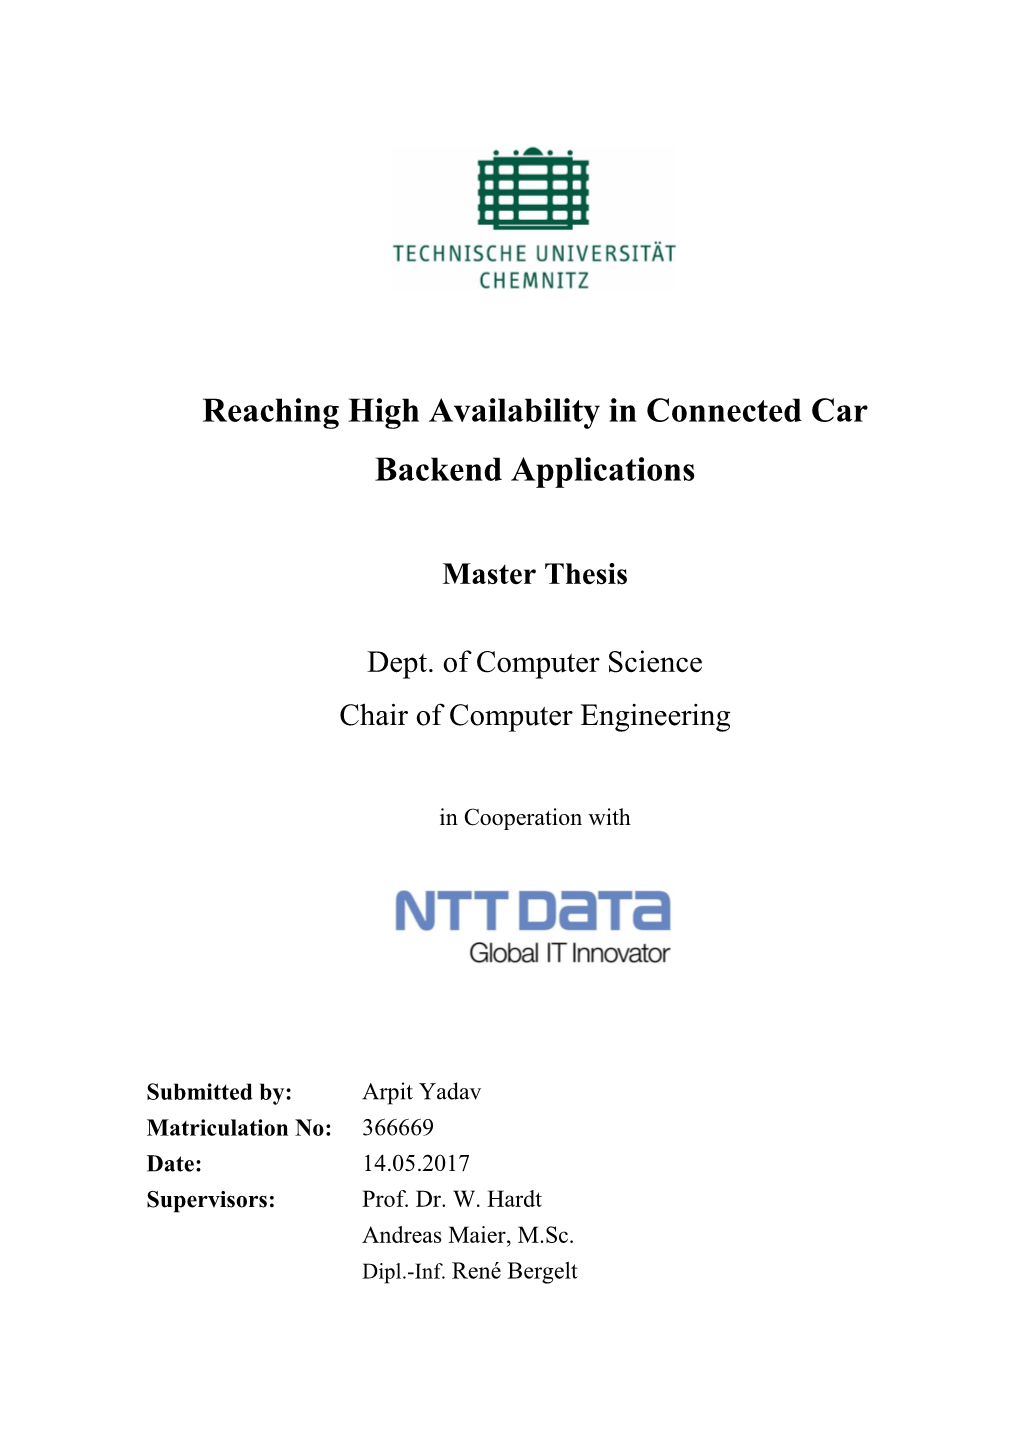 Reaching High Availability in Connected Car Backend Applications